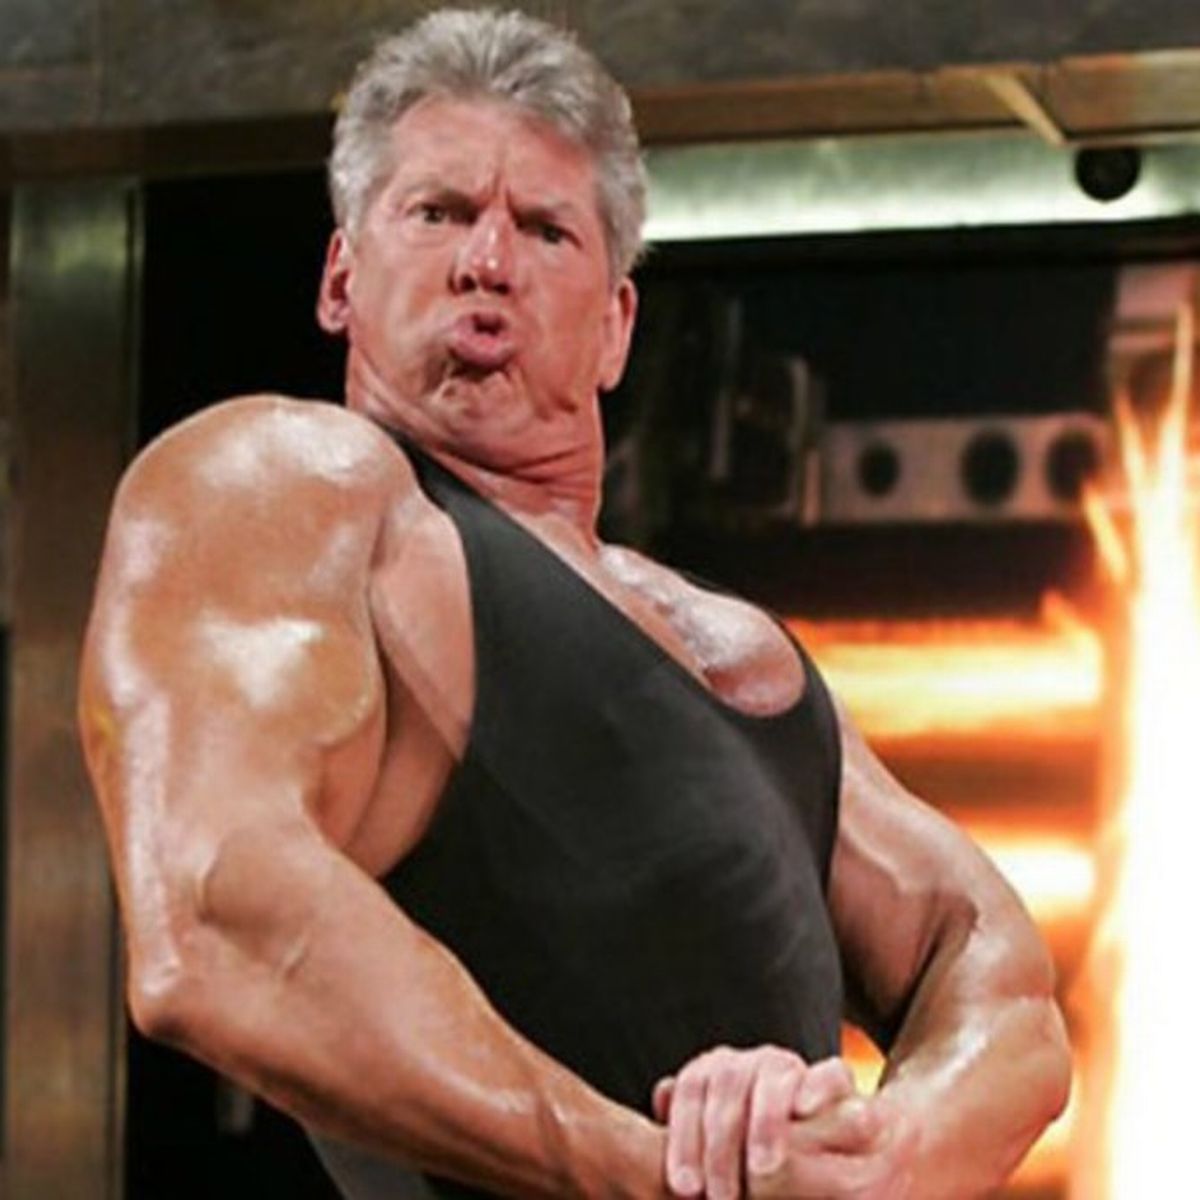 1648880526 WWE legend Vince McMahon 76 works out at 3am with